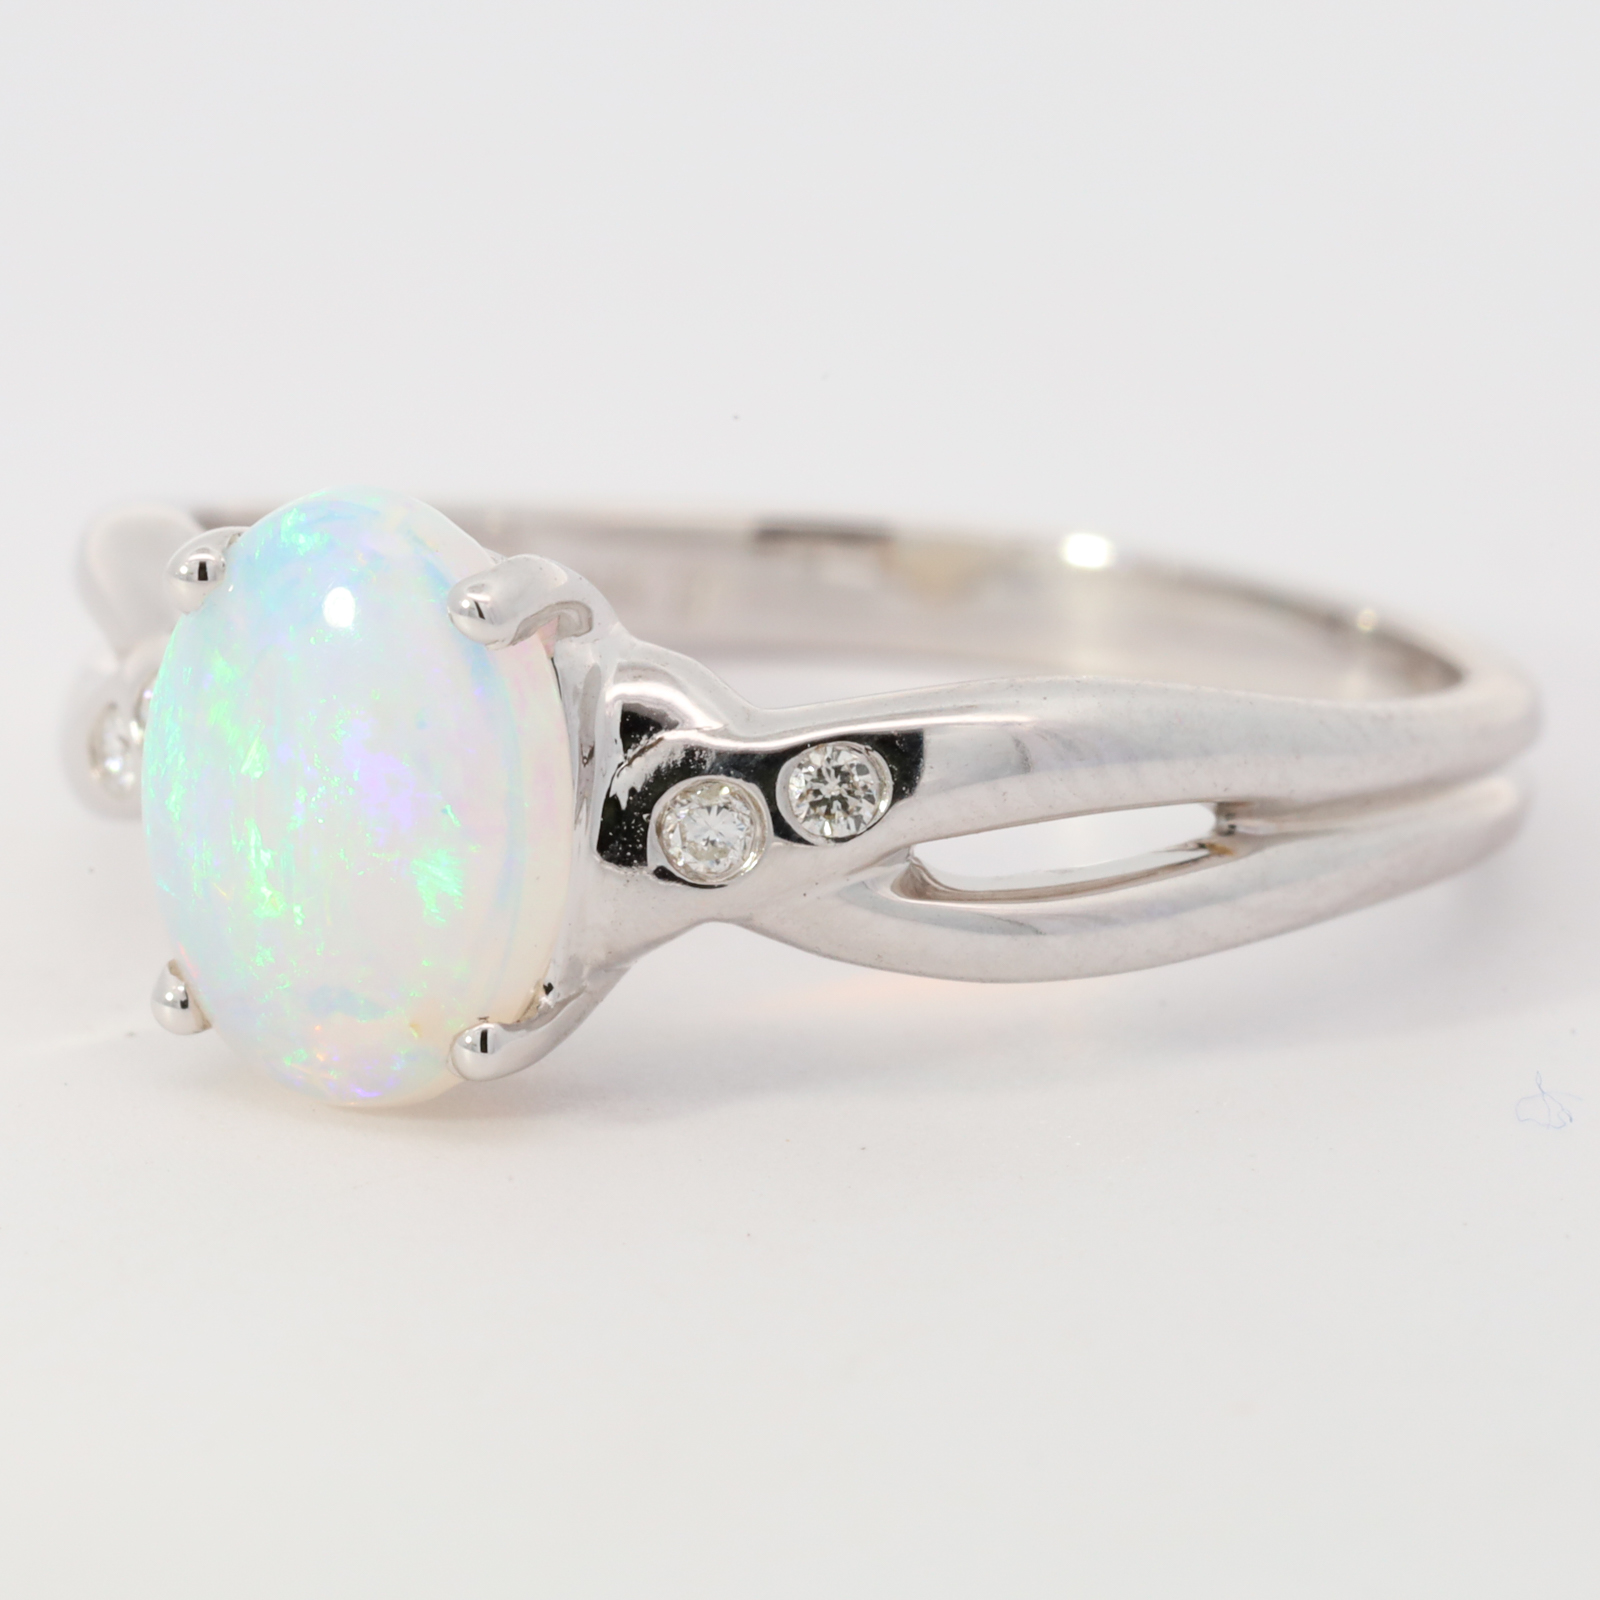 Blue Green White Gold Solid Australian Crystal Opal Engagement Ring with Diamonds